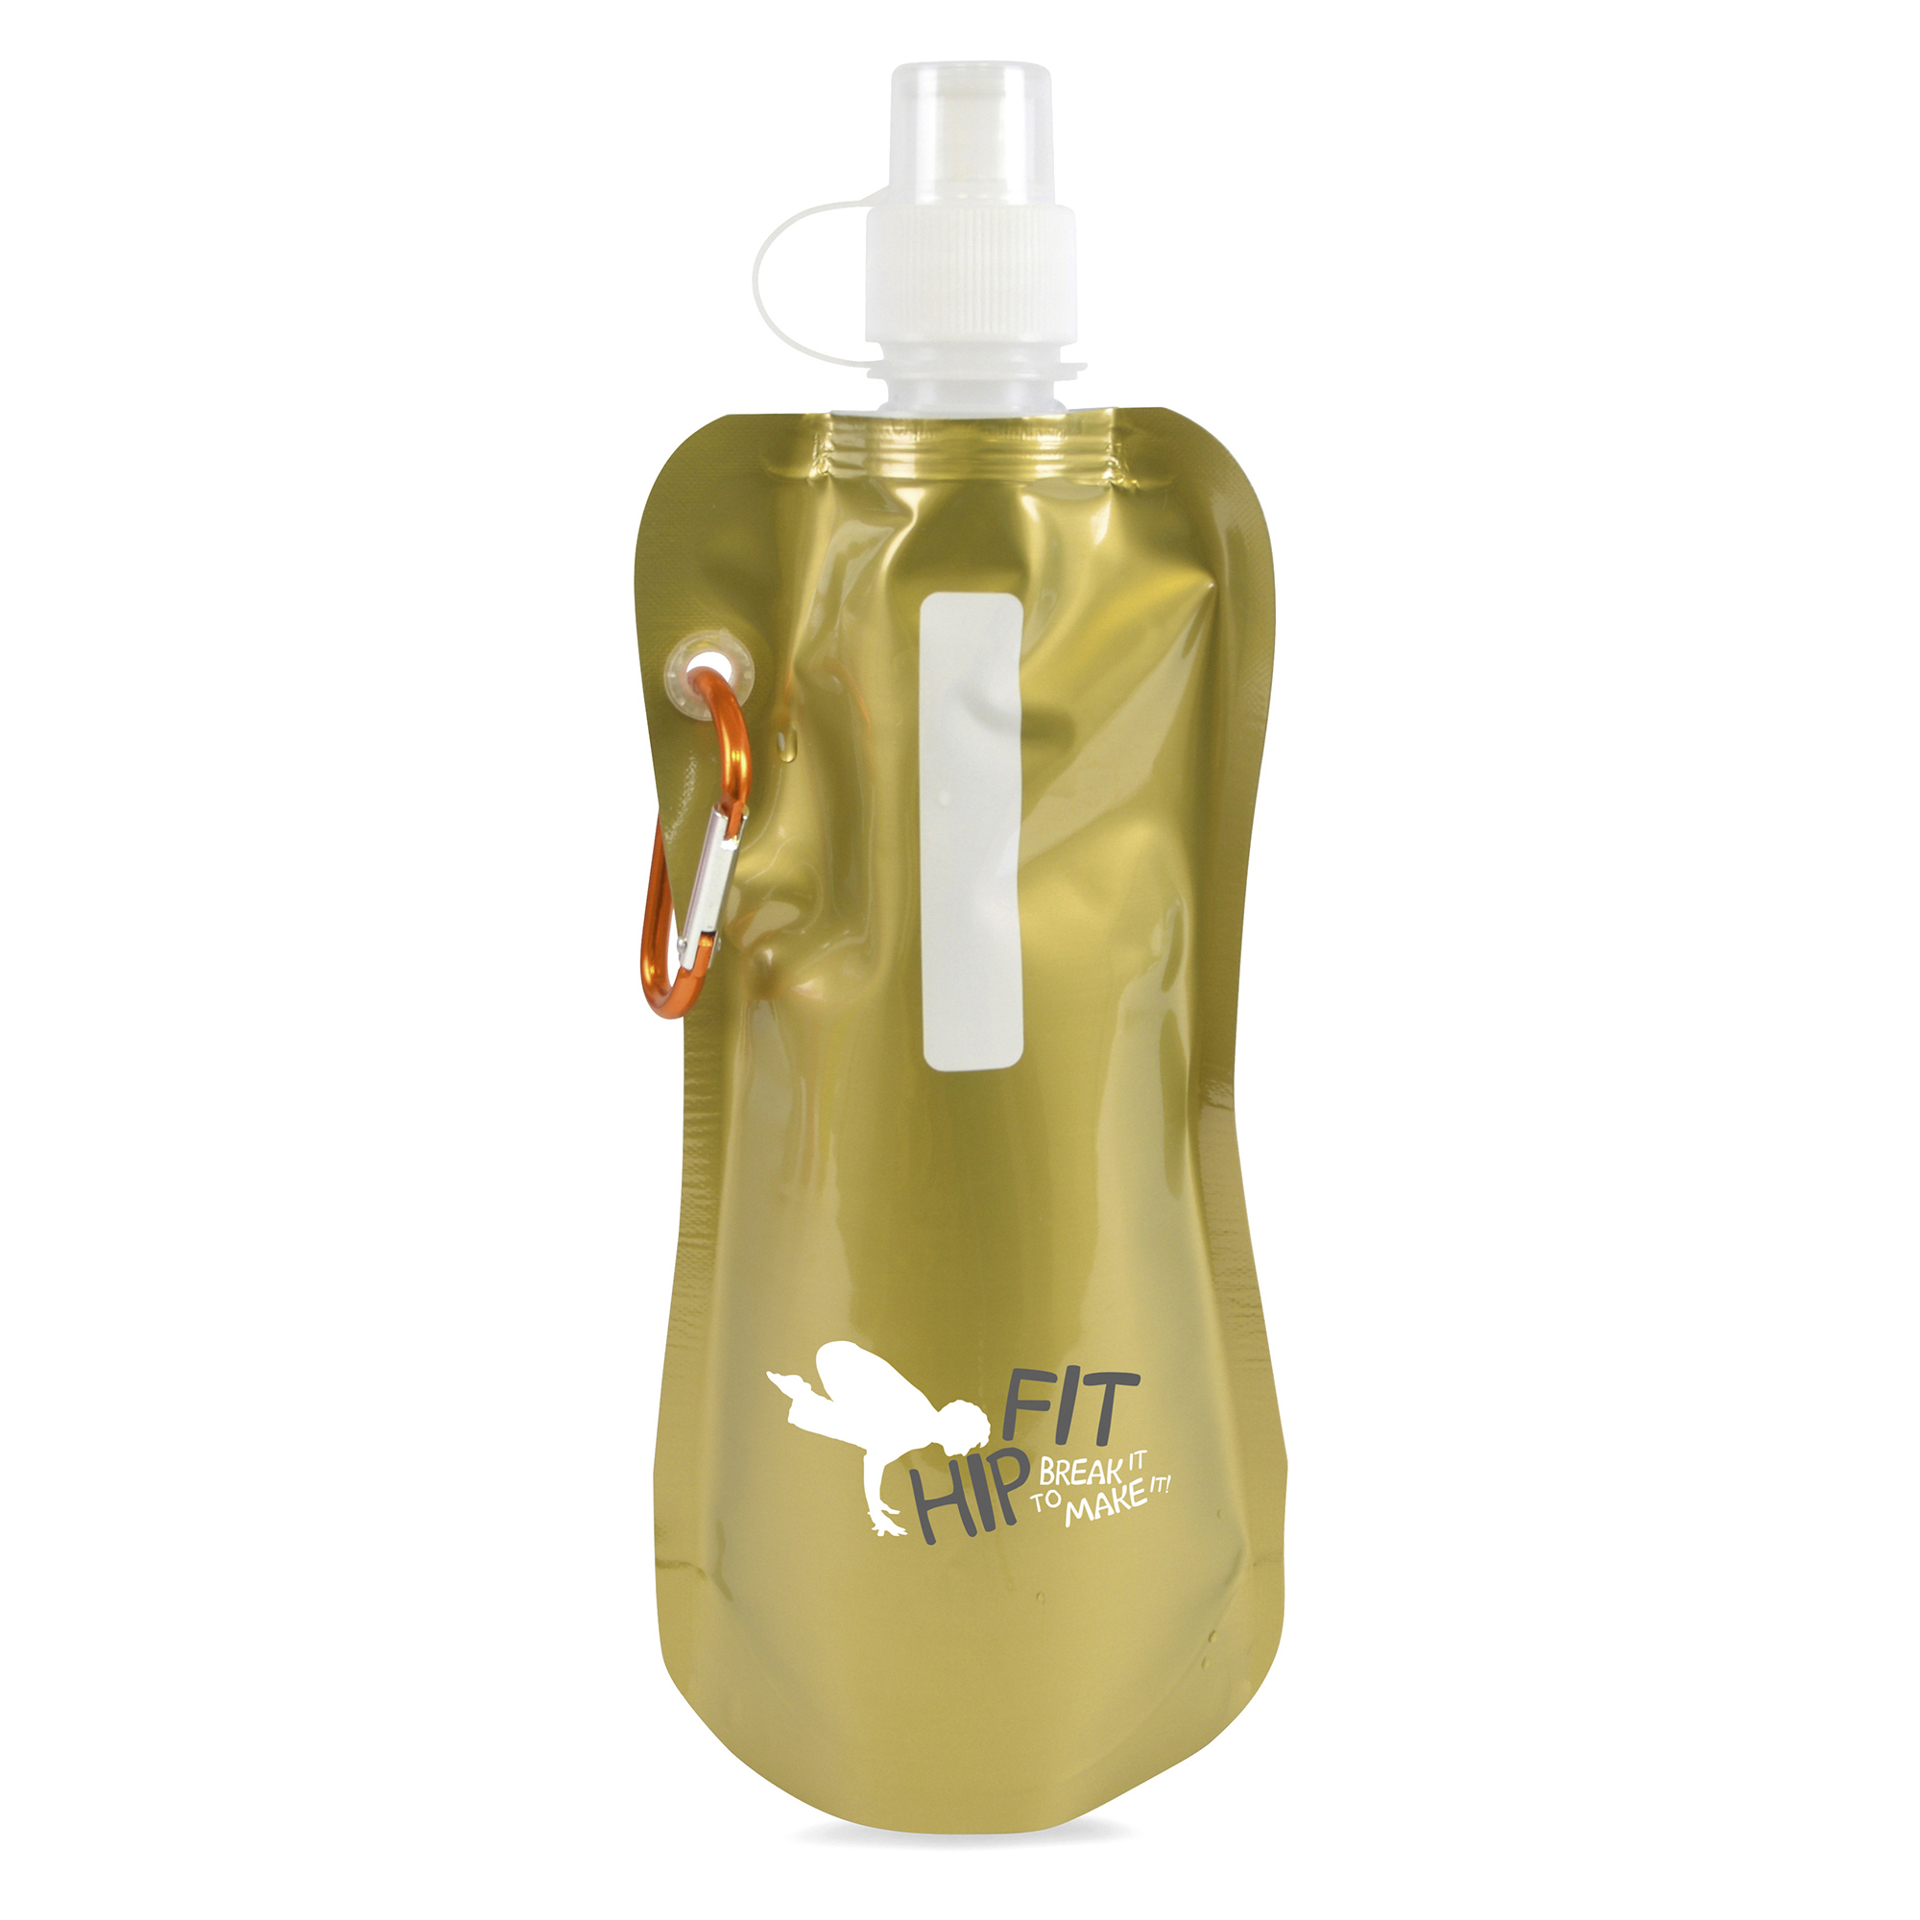 Roll up bottle in gold printed with a company logo